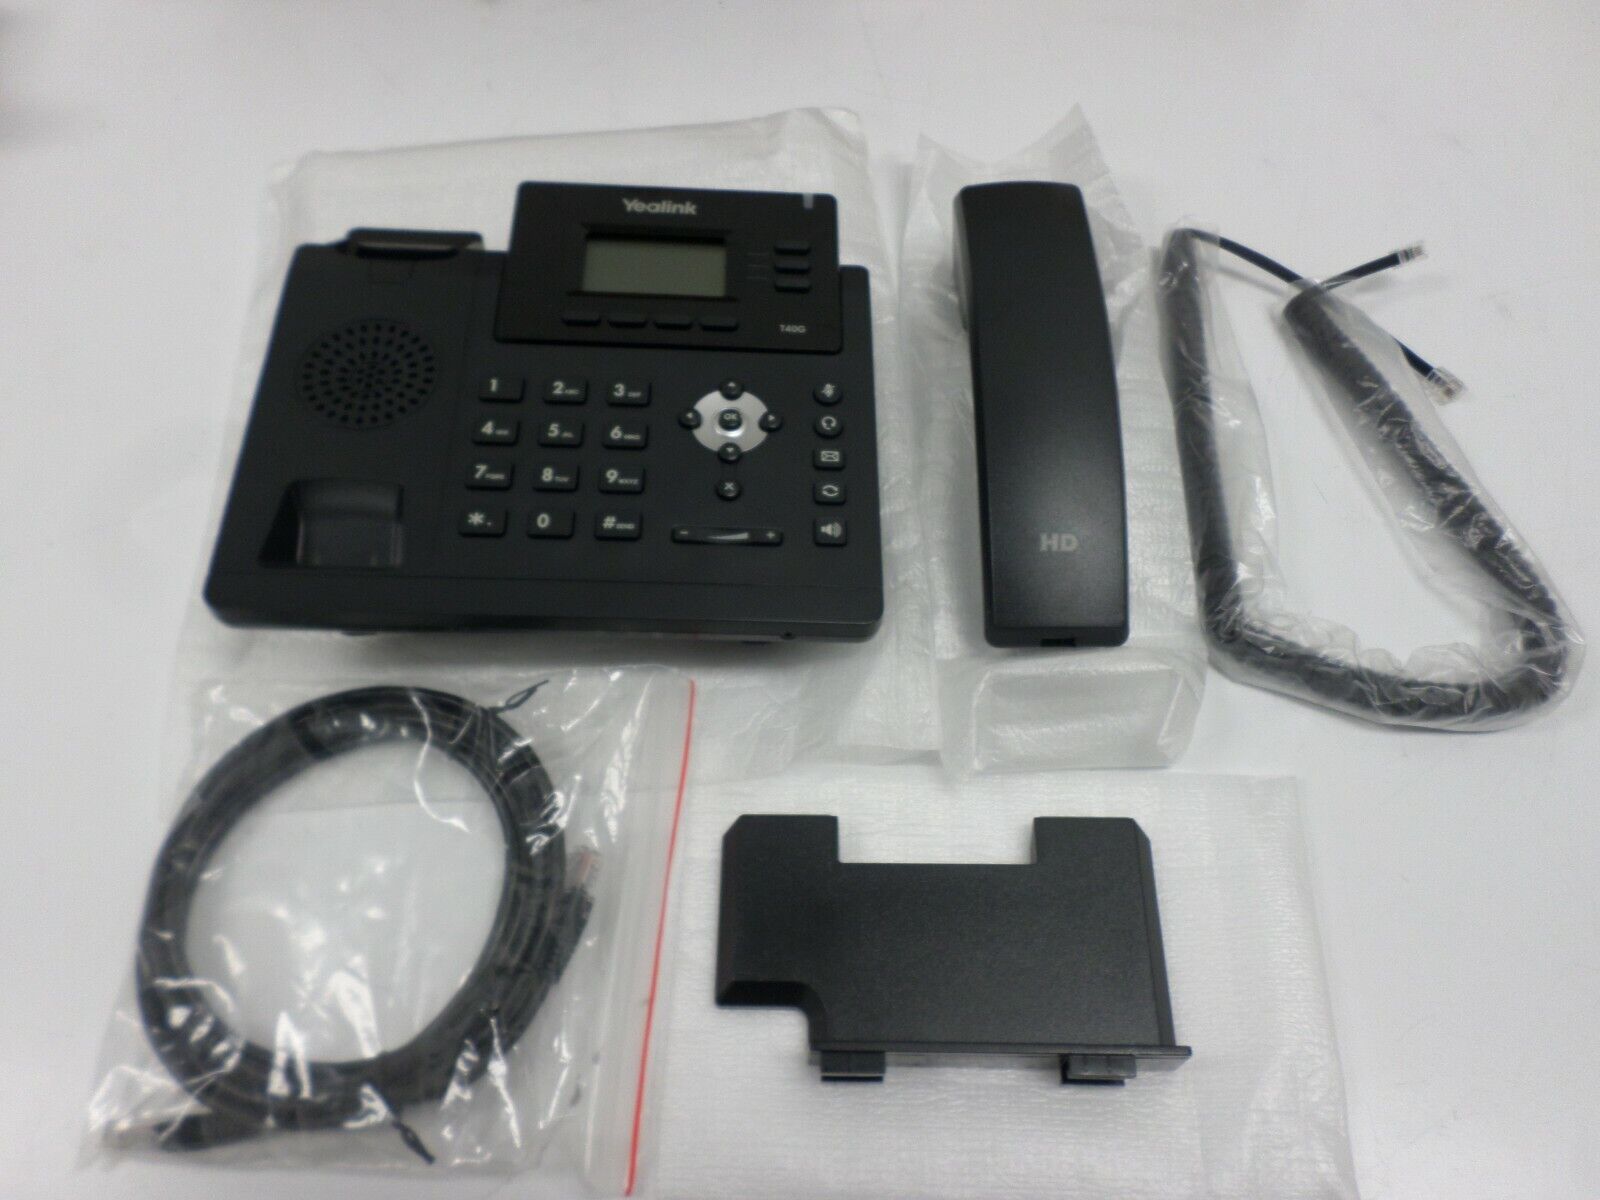 Yealink SIP-T40G IP Phone 3-Lines HD Voice For Parts 